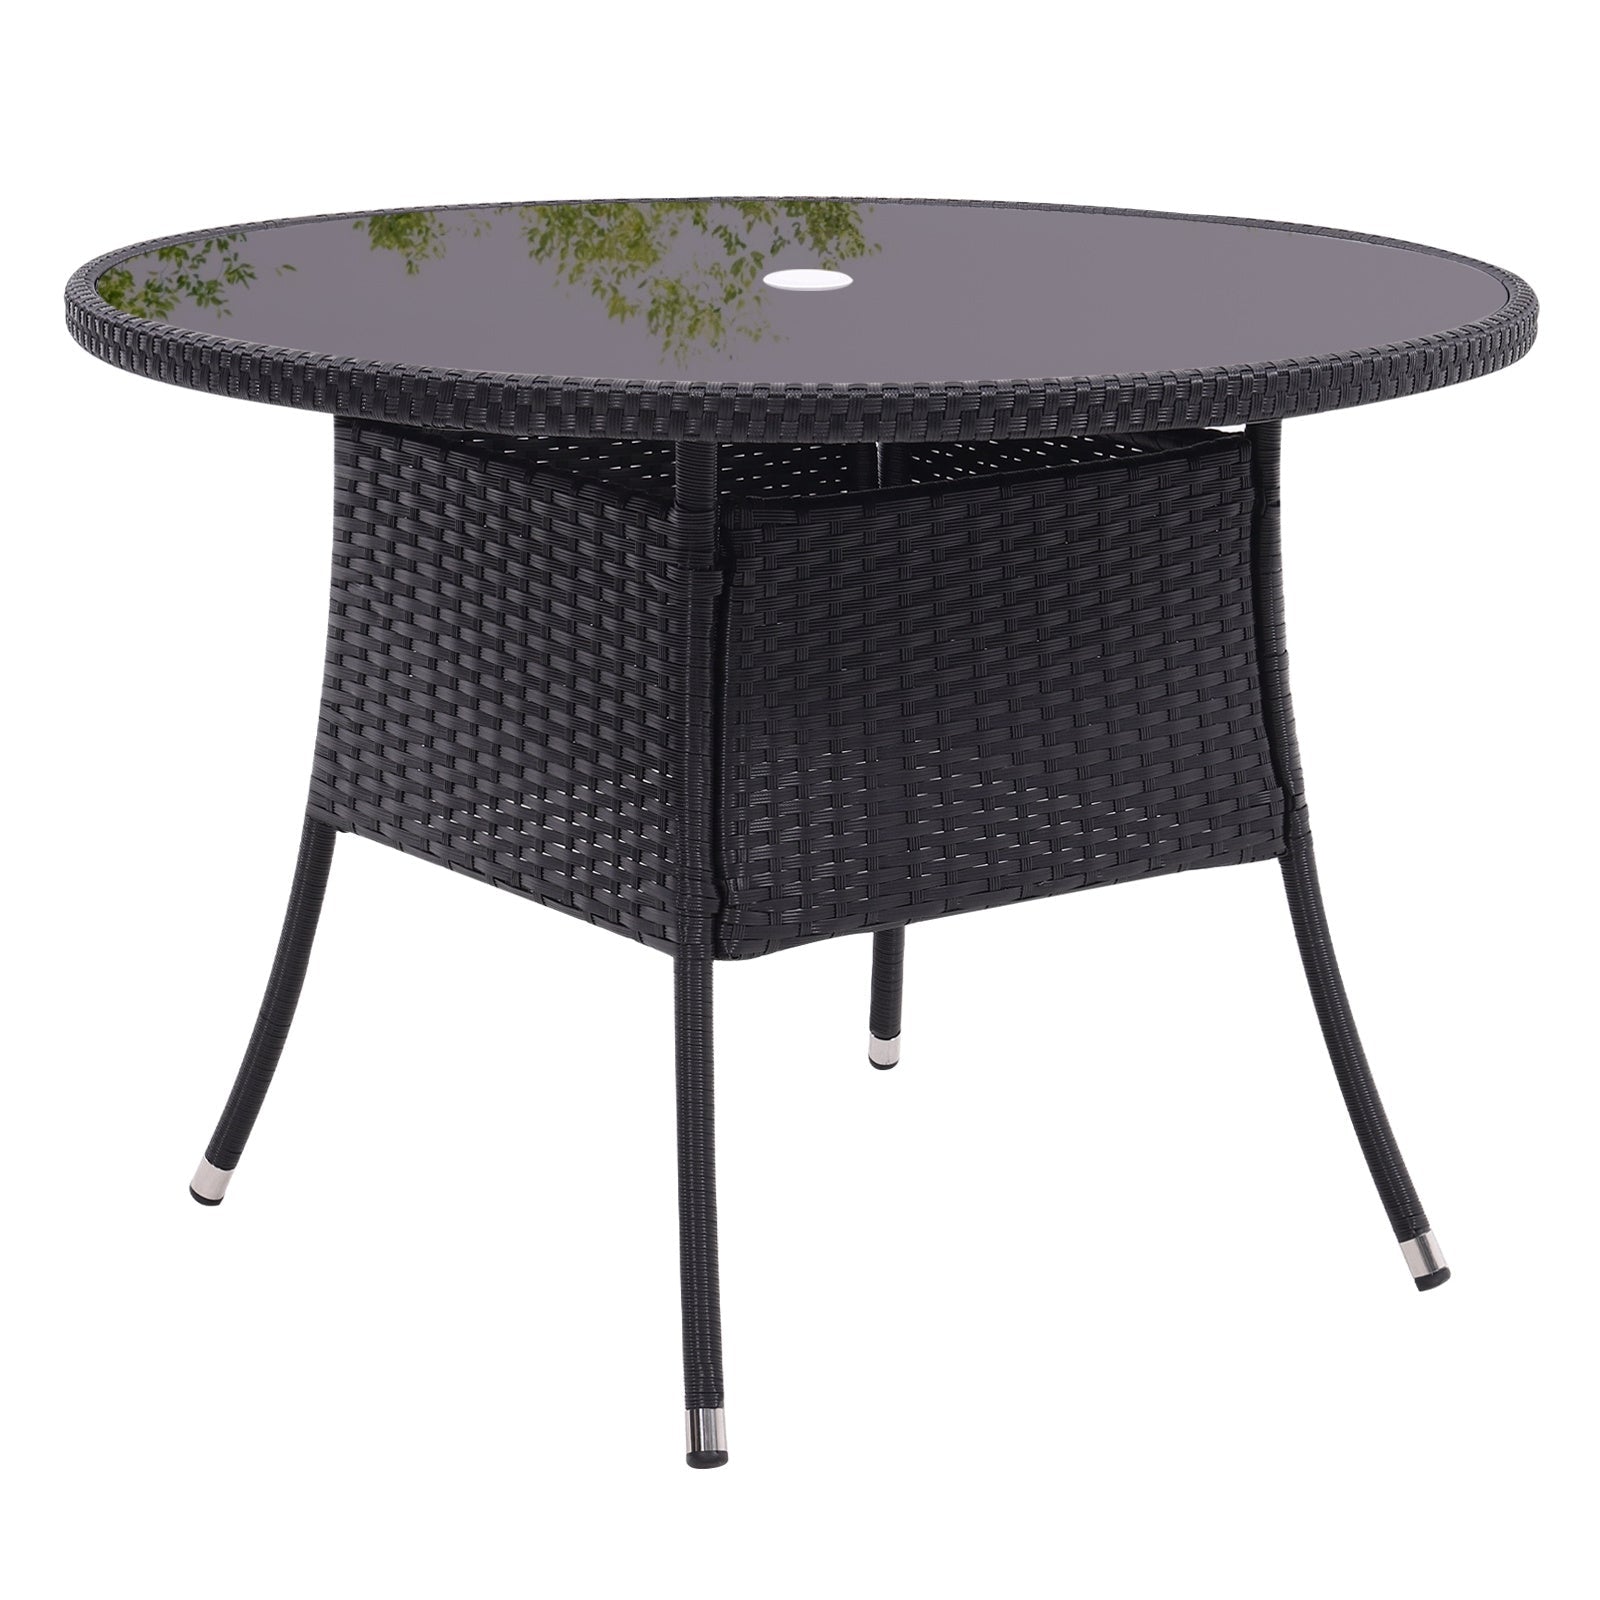 105cm Round/ Square Coffee Table Bistro Outdoor Garden Patio Tables & Parasol Hole Garden Dining Table   Round Black 